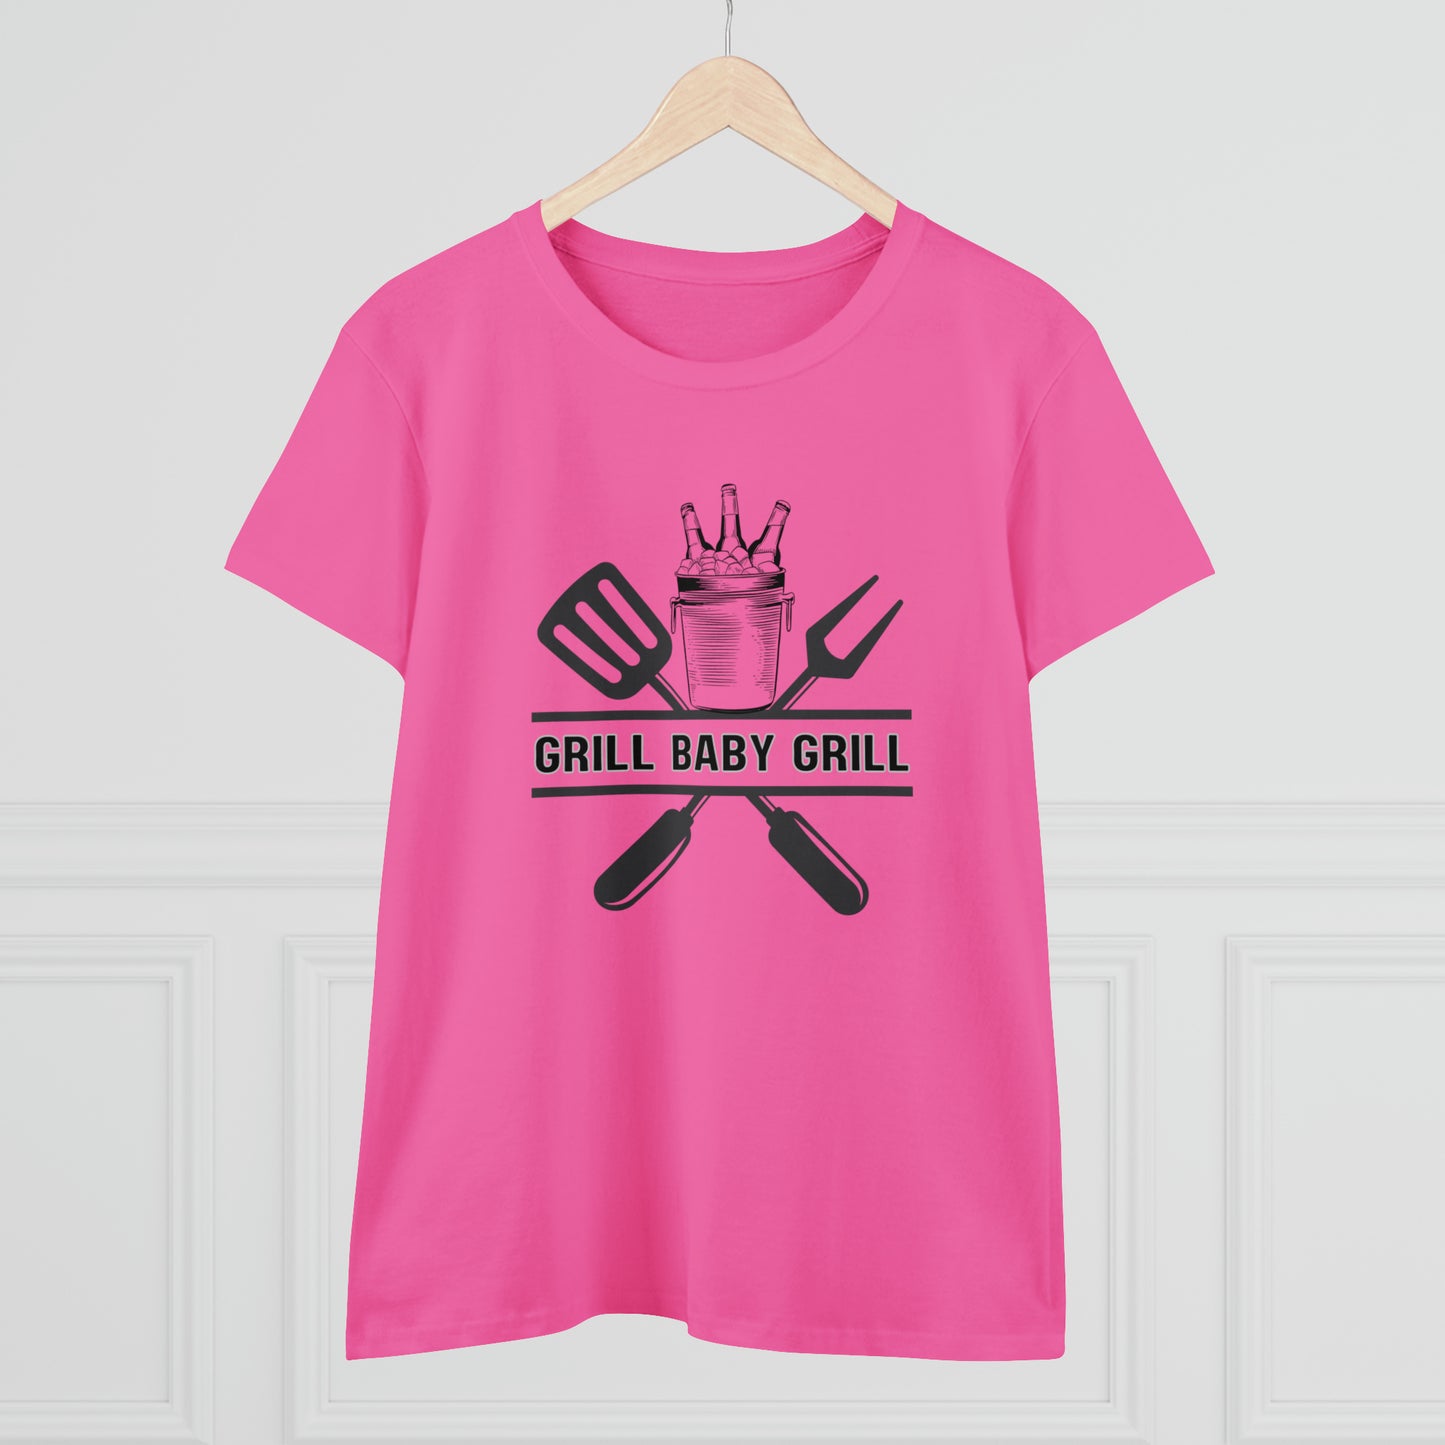 Hobby, Interests, Grilling, Grill Baby Grill, Family, Dad, Mom- Adult, Semi-fitted, T-shirt